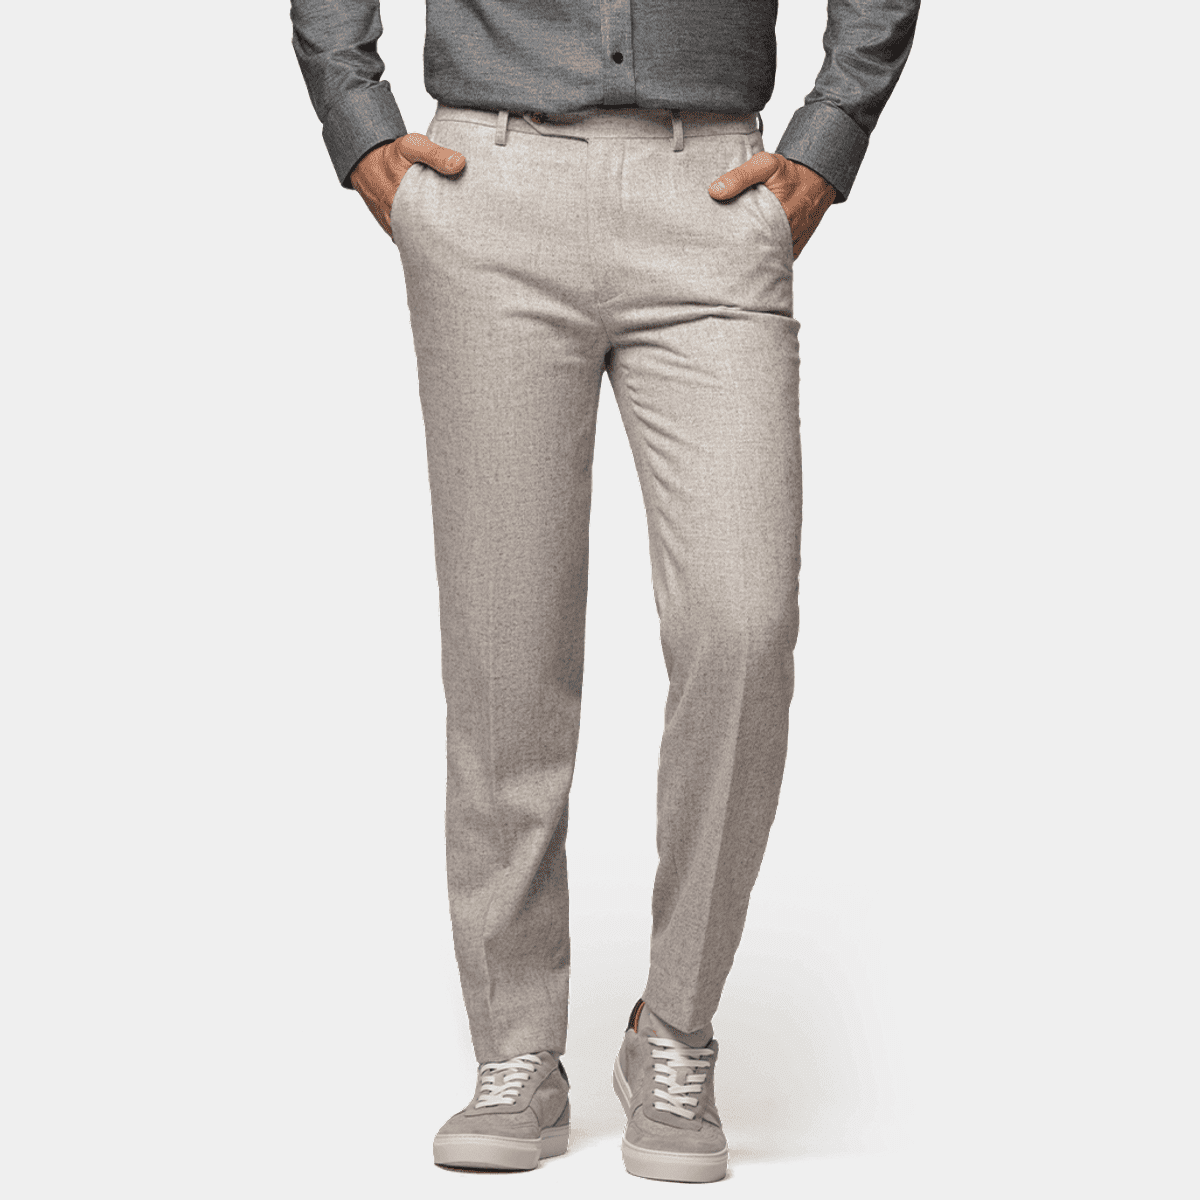 Buy Grey Tailored Trimmed Donegal Fabric Suit: Trousers from the Next UK  online shop